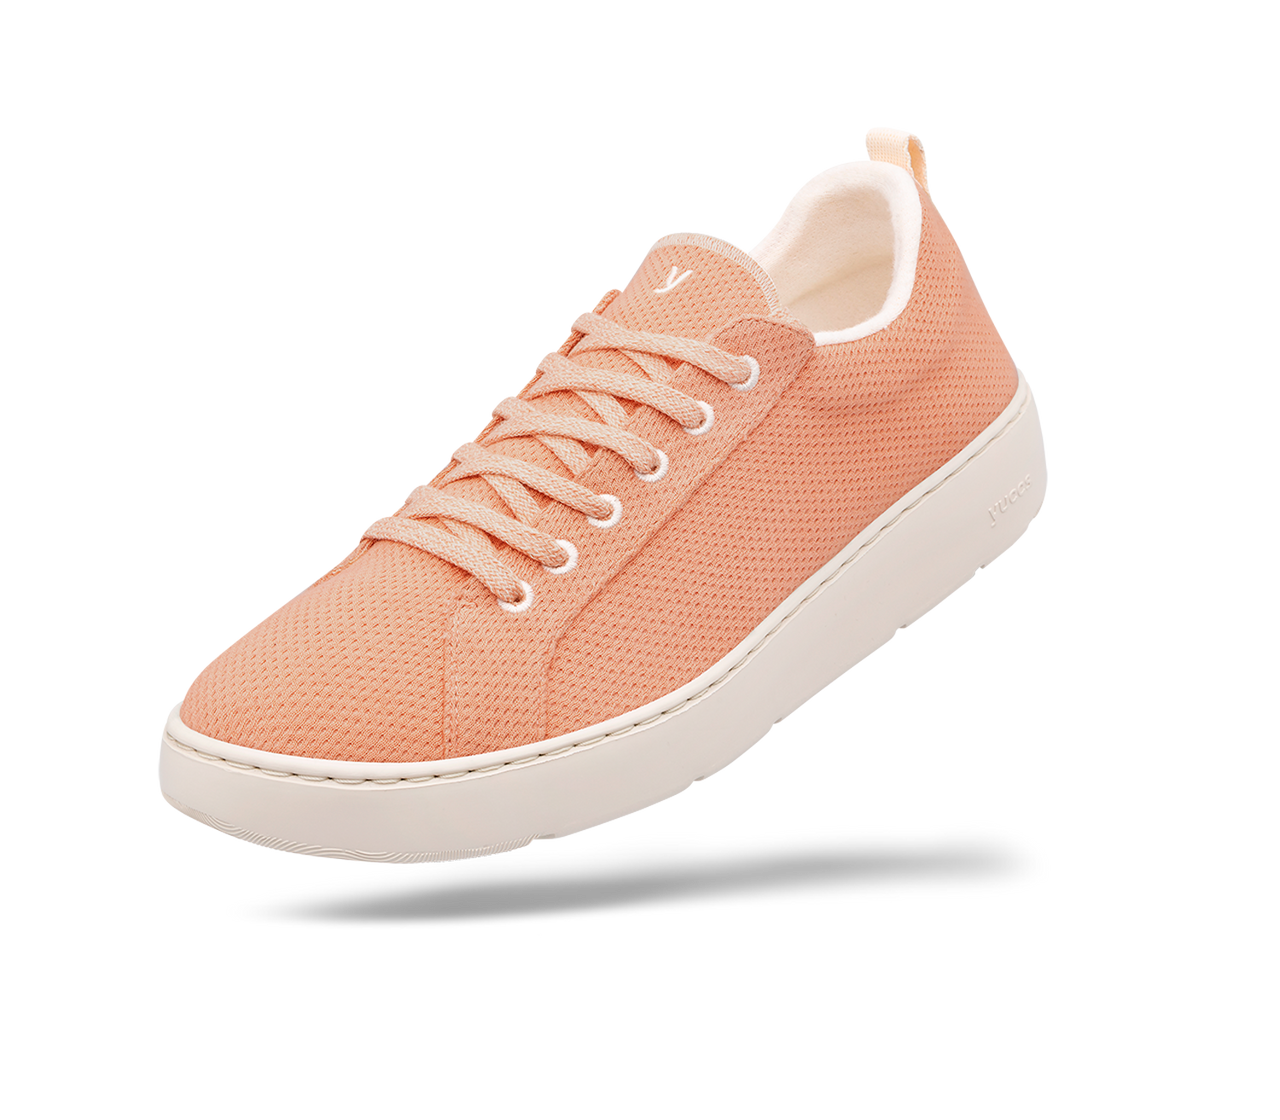 Bamboo Casual Outlet Mulher